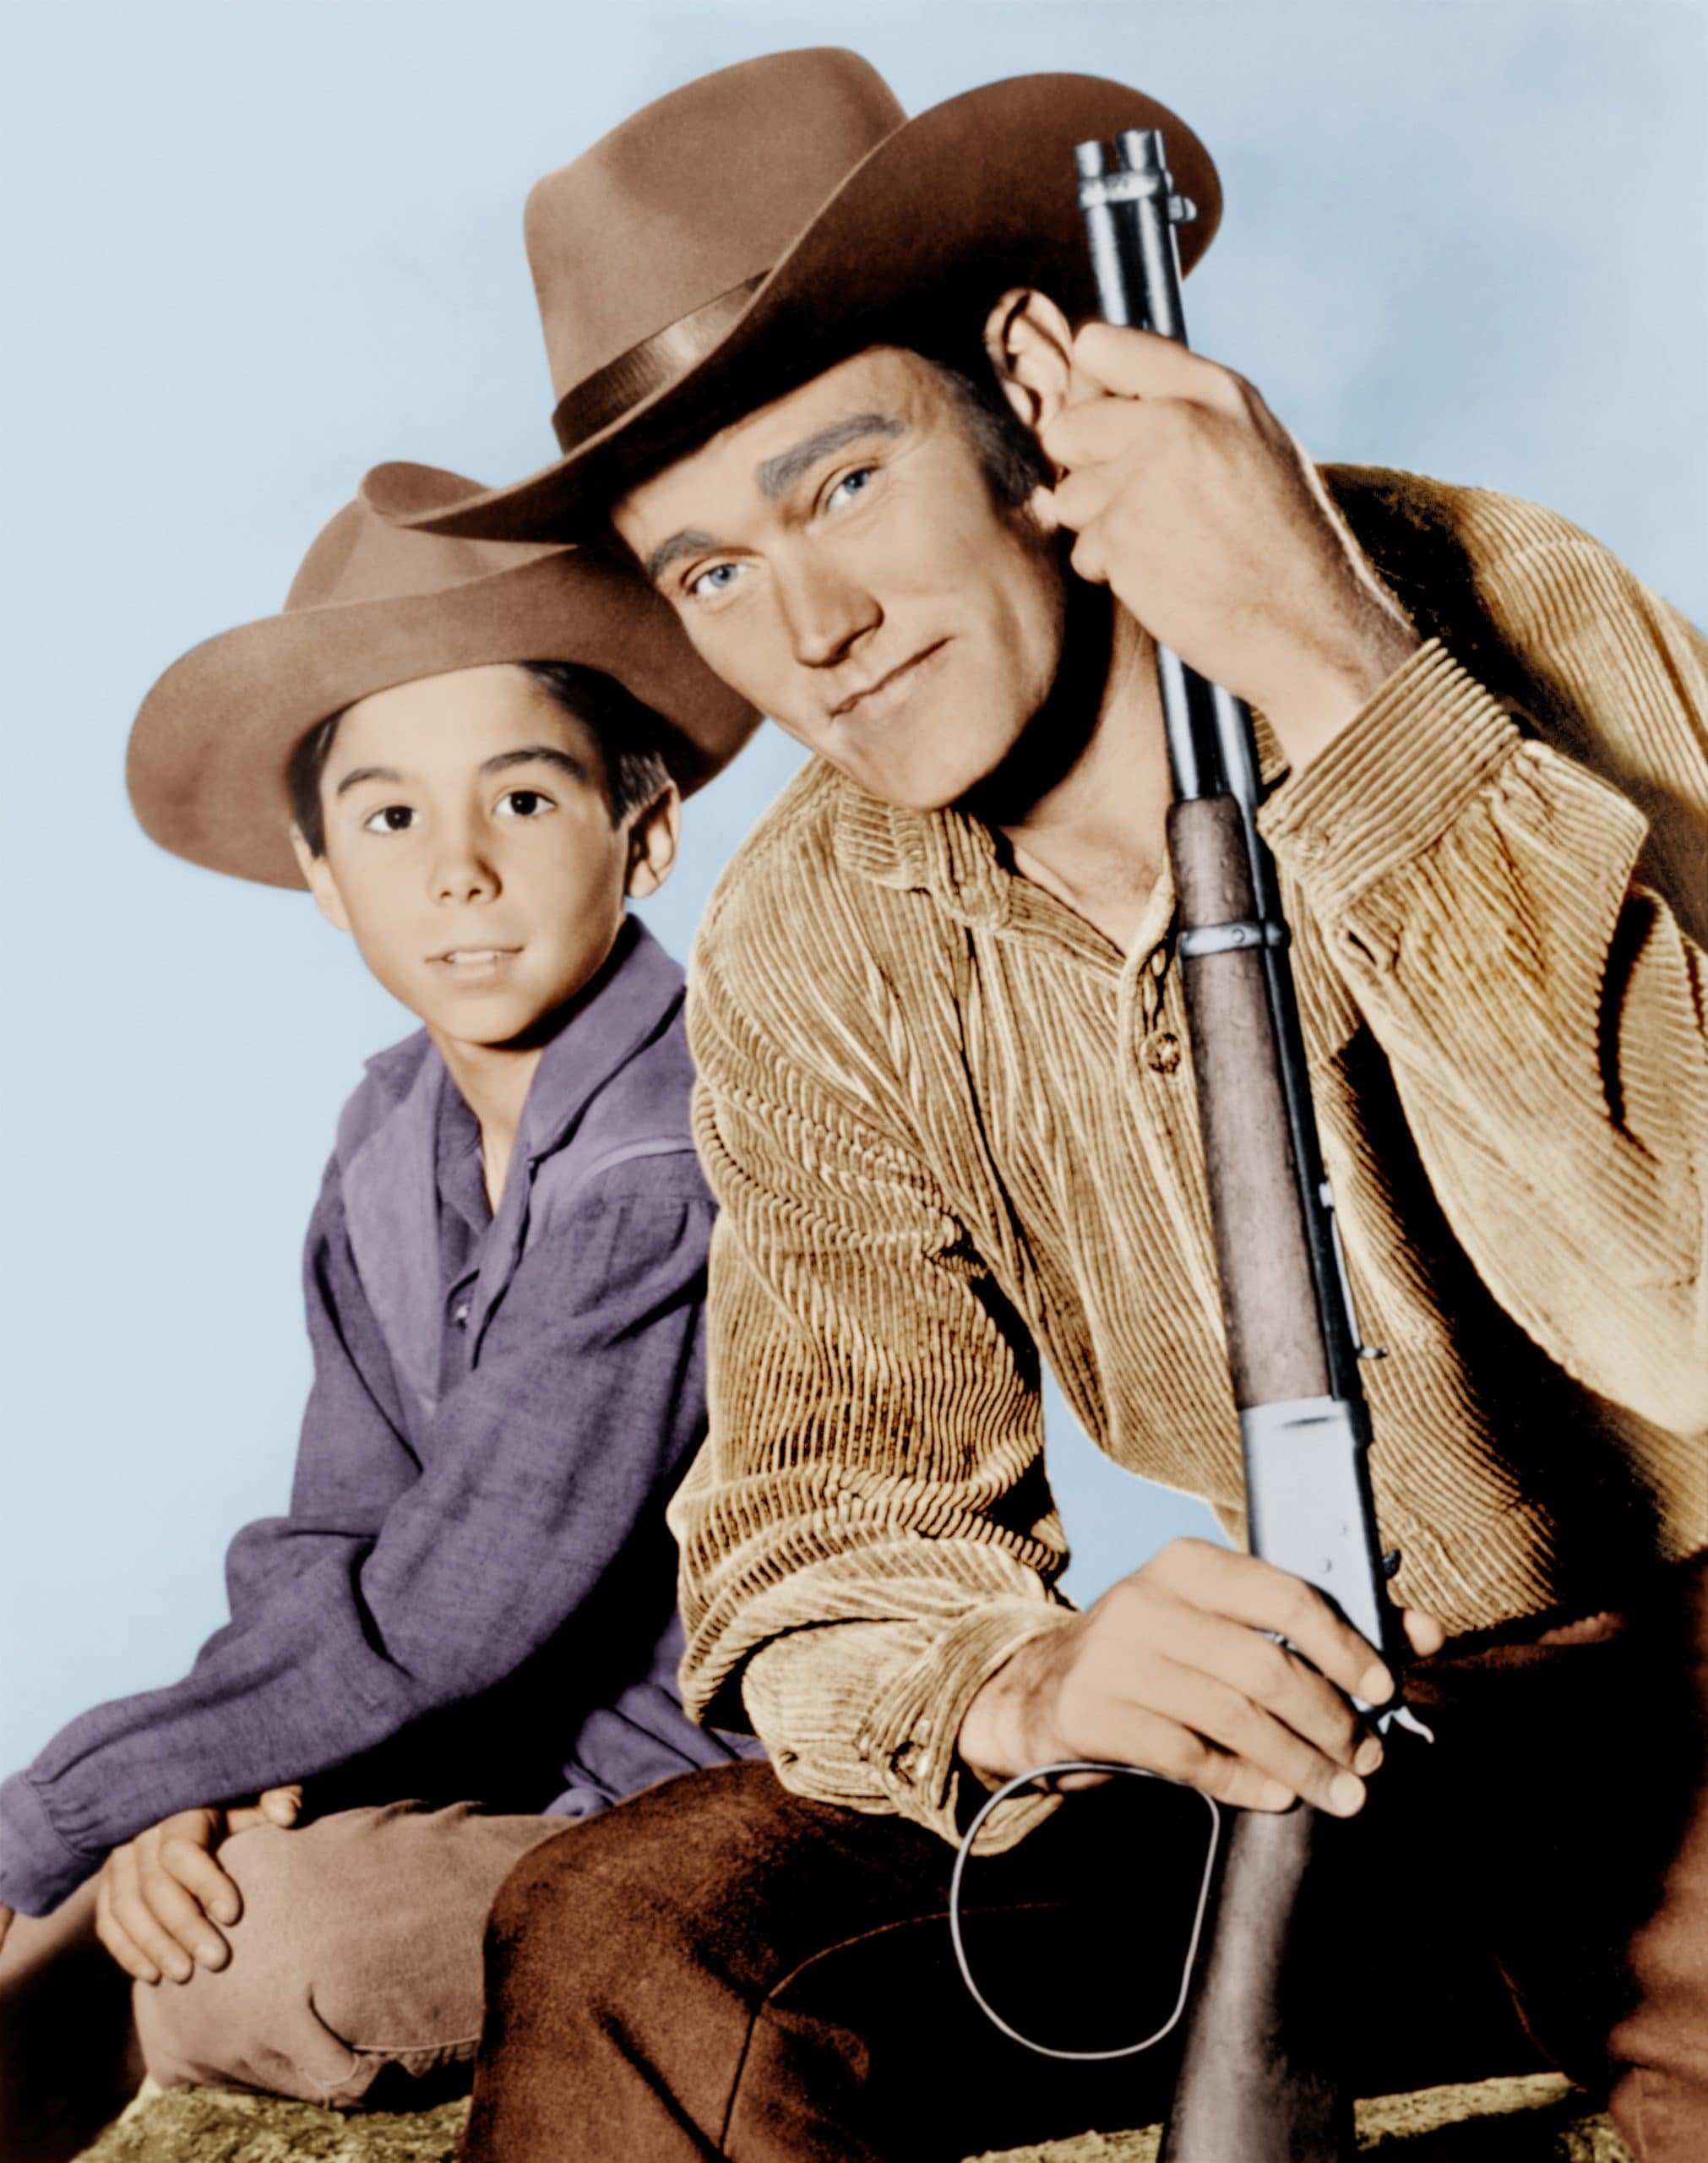 THE RIFLEMAN, from left: Johnny Crawford, Chuck Connors, 1958-63